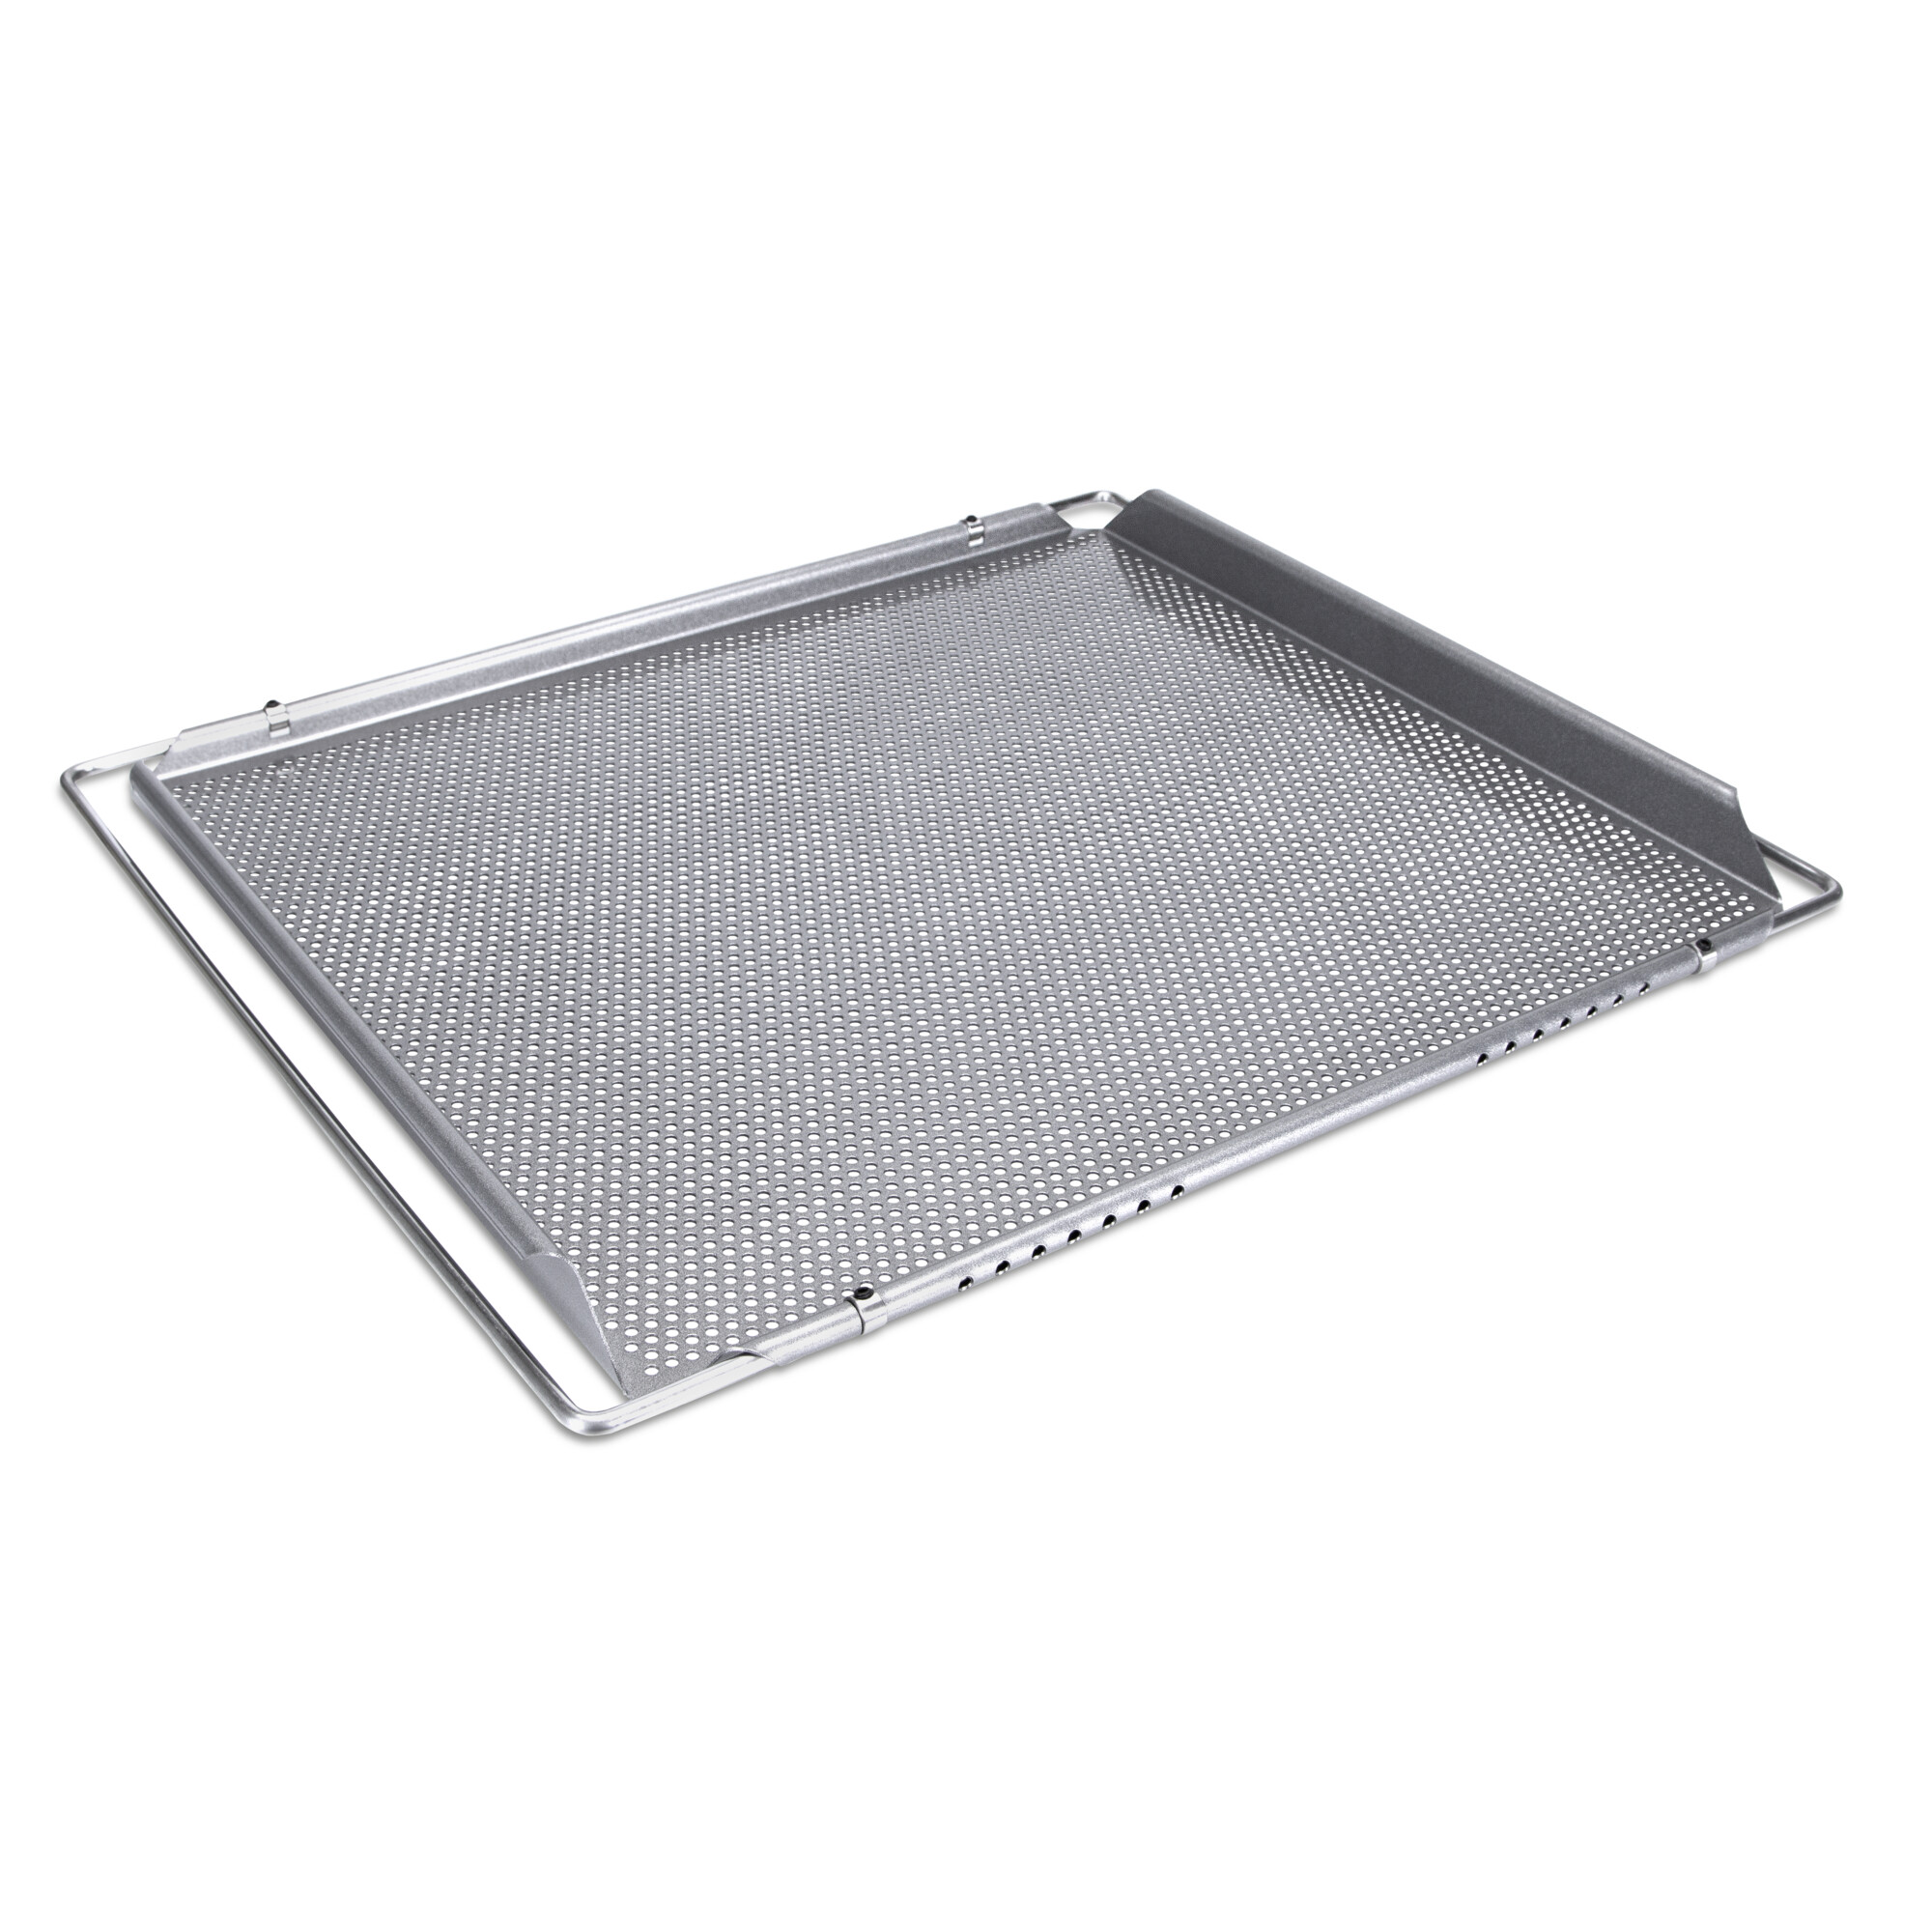 we love baking – Oven baking tray – with special perforation